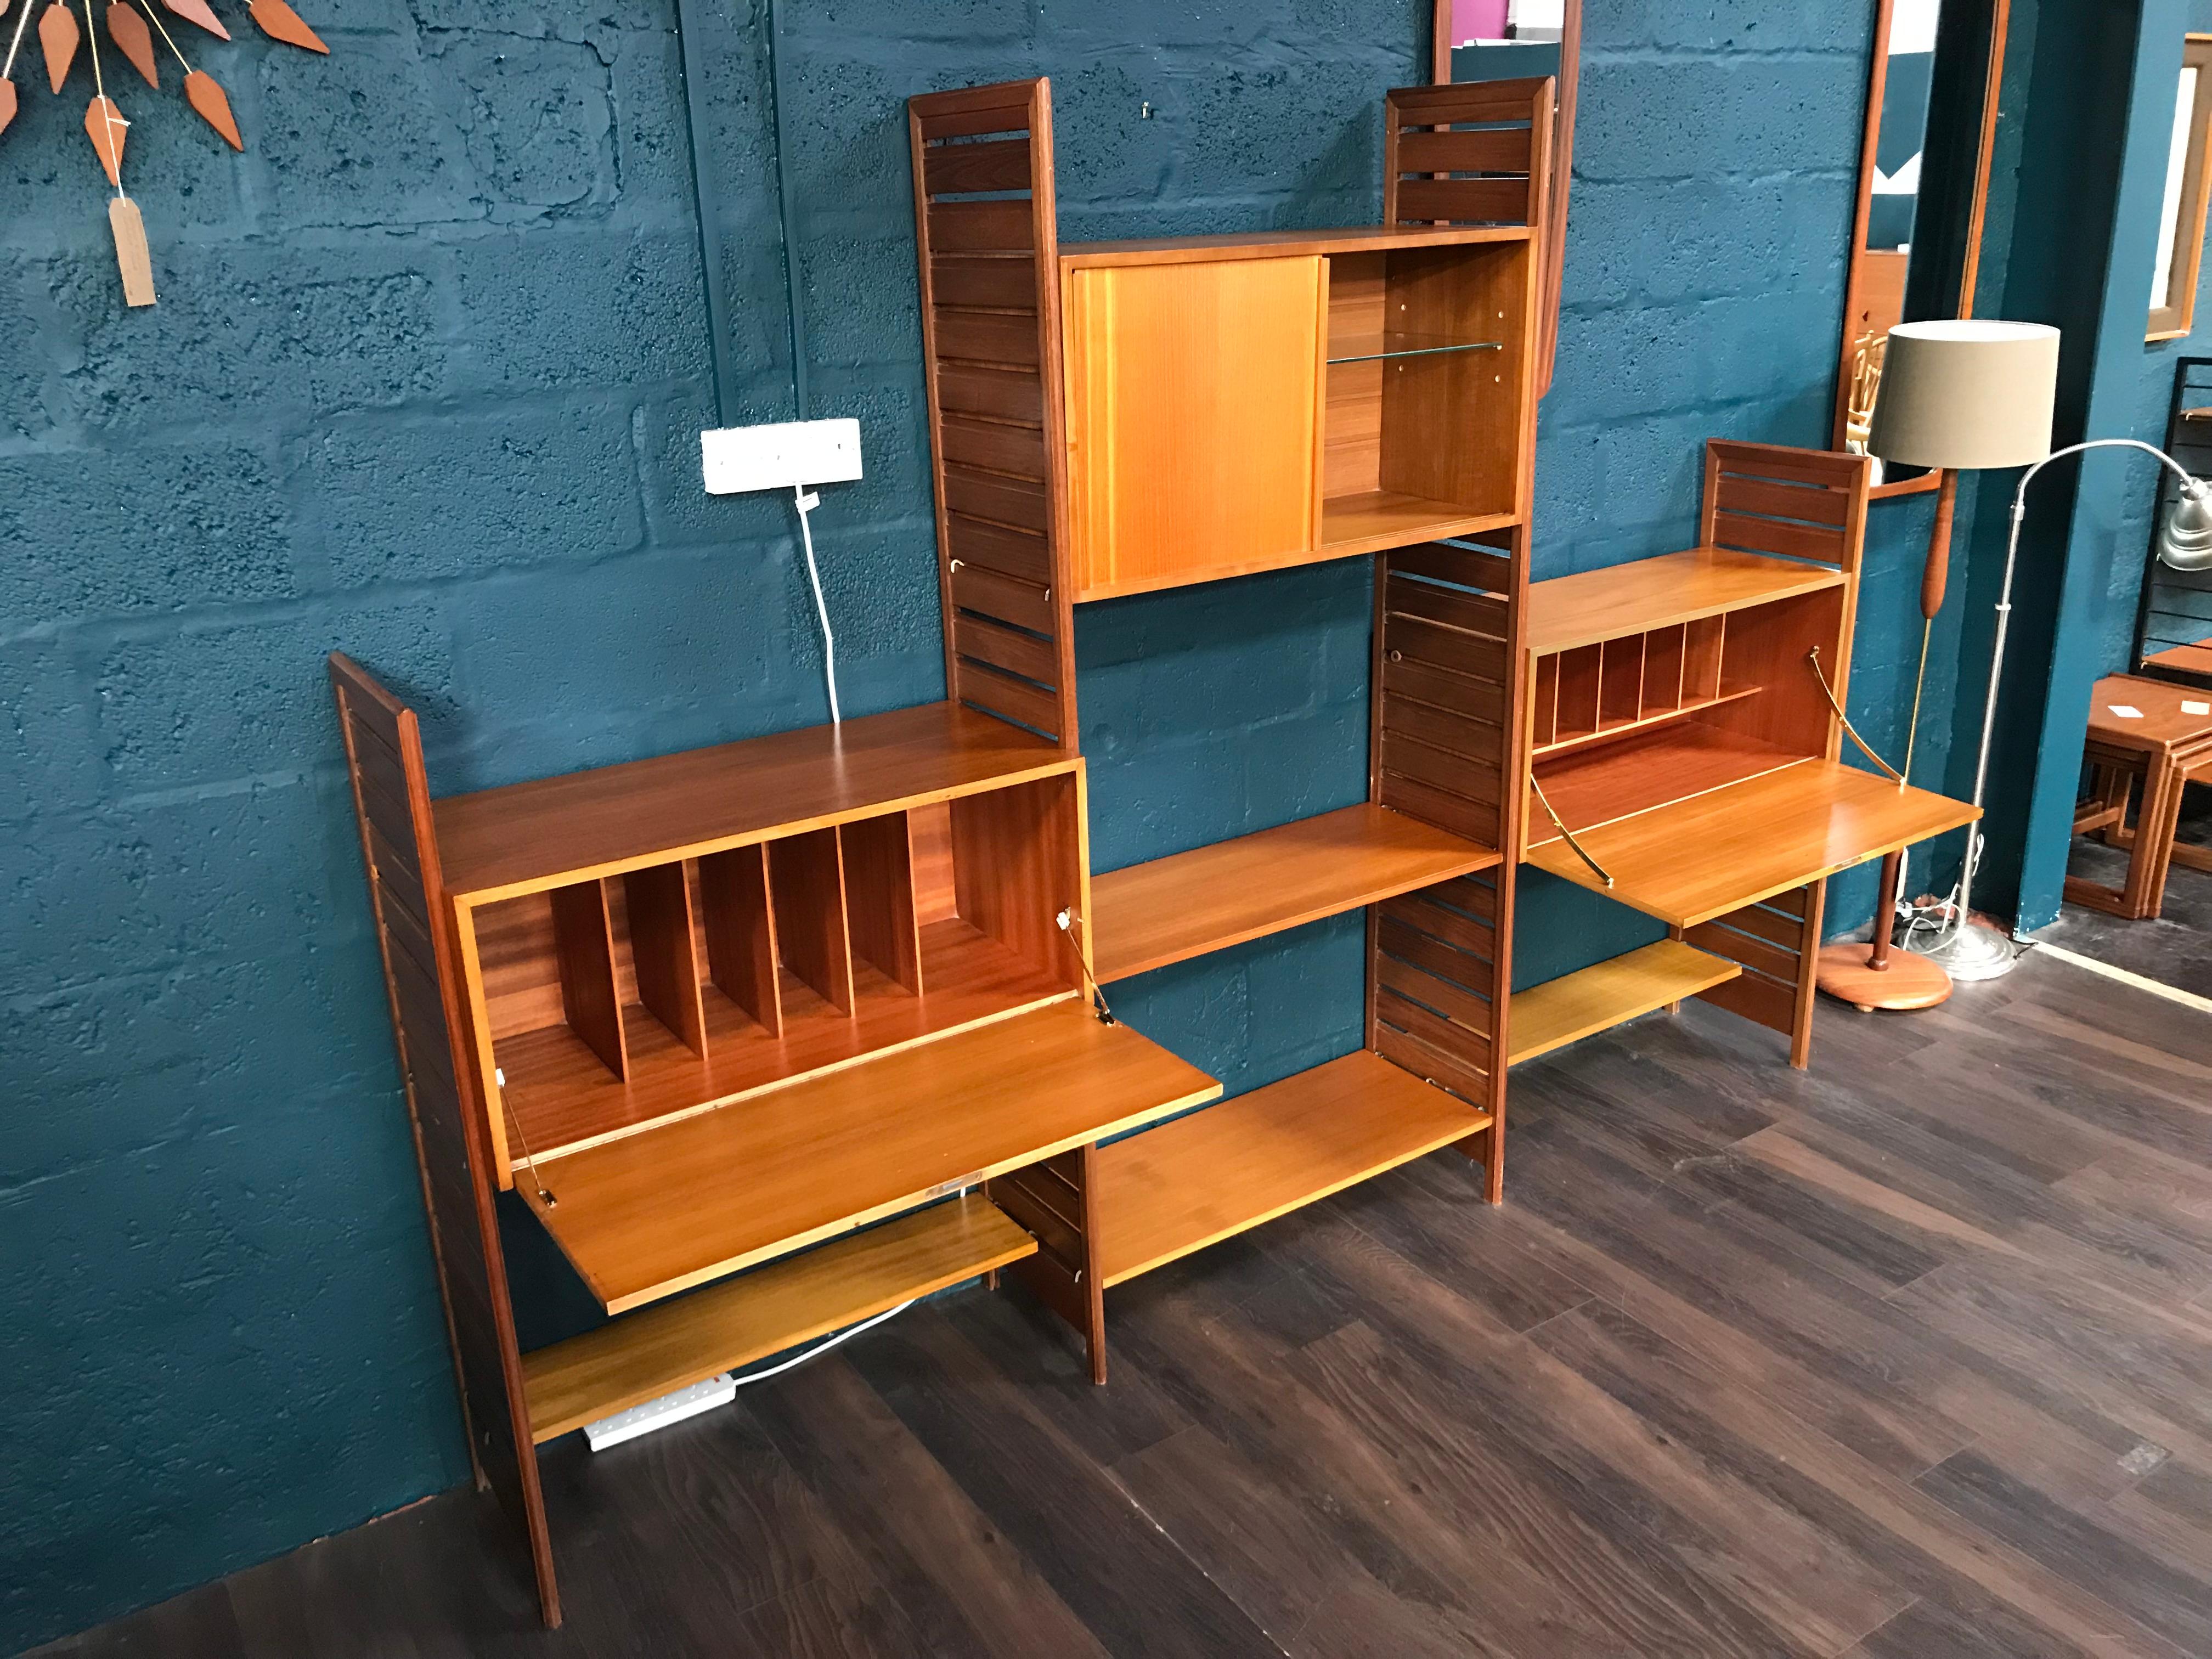 British 3-Bay Ladderax Teak Midcentury Shelving System by Robert Heal for Staples For Sale